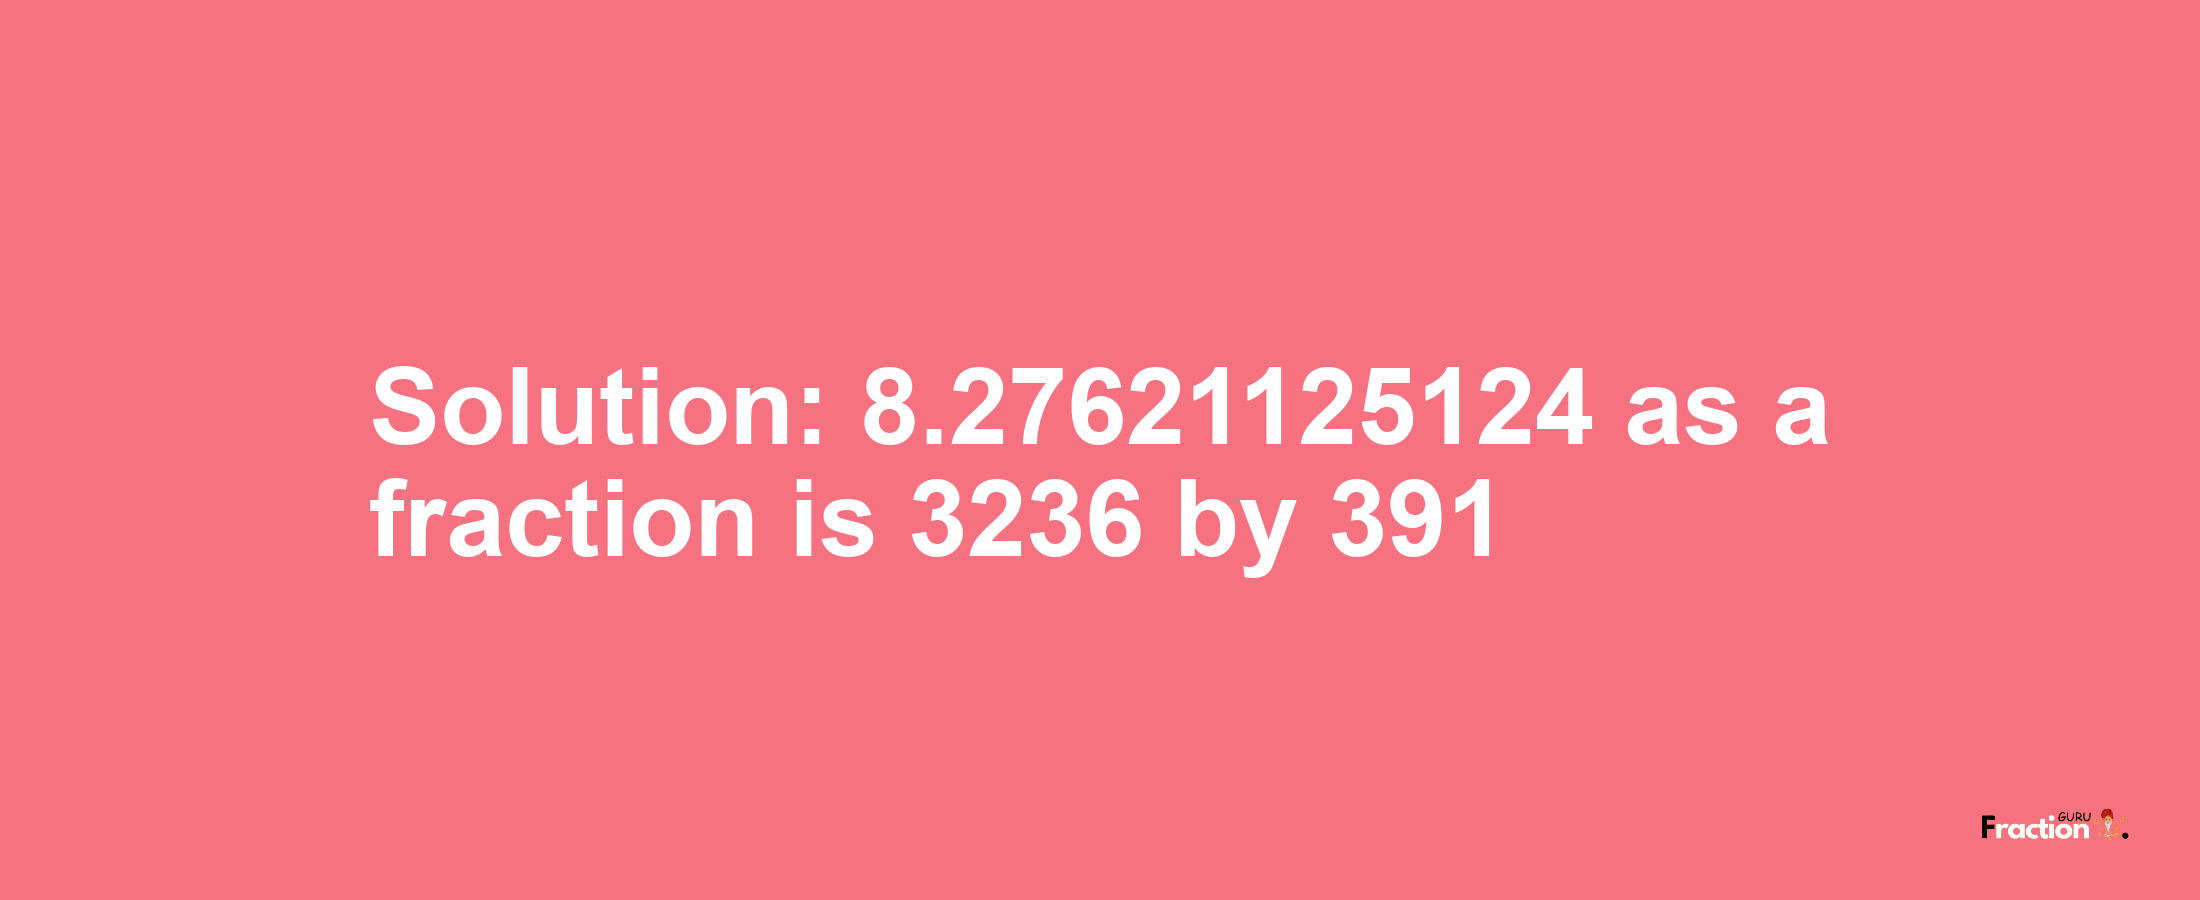 Solution:8.27621125124 as a fraction is 3236/391